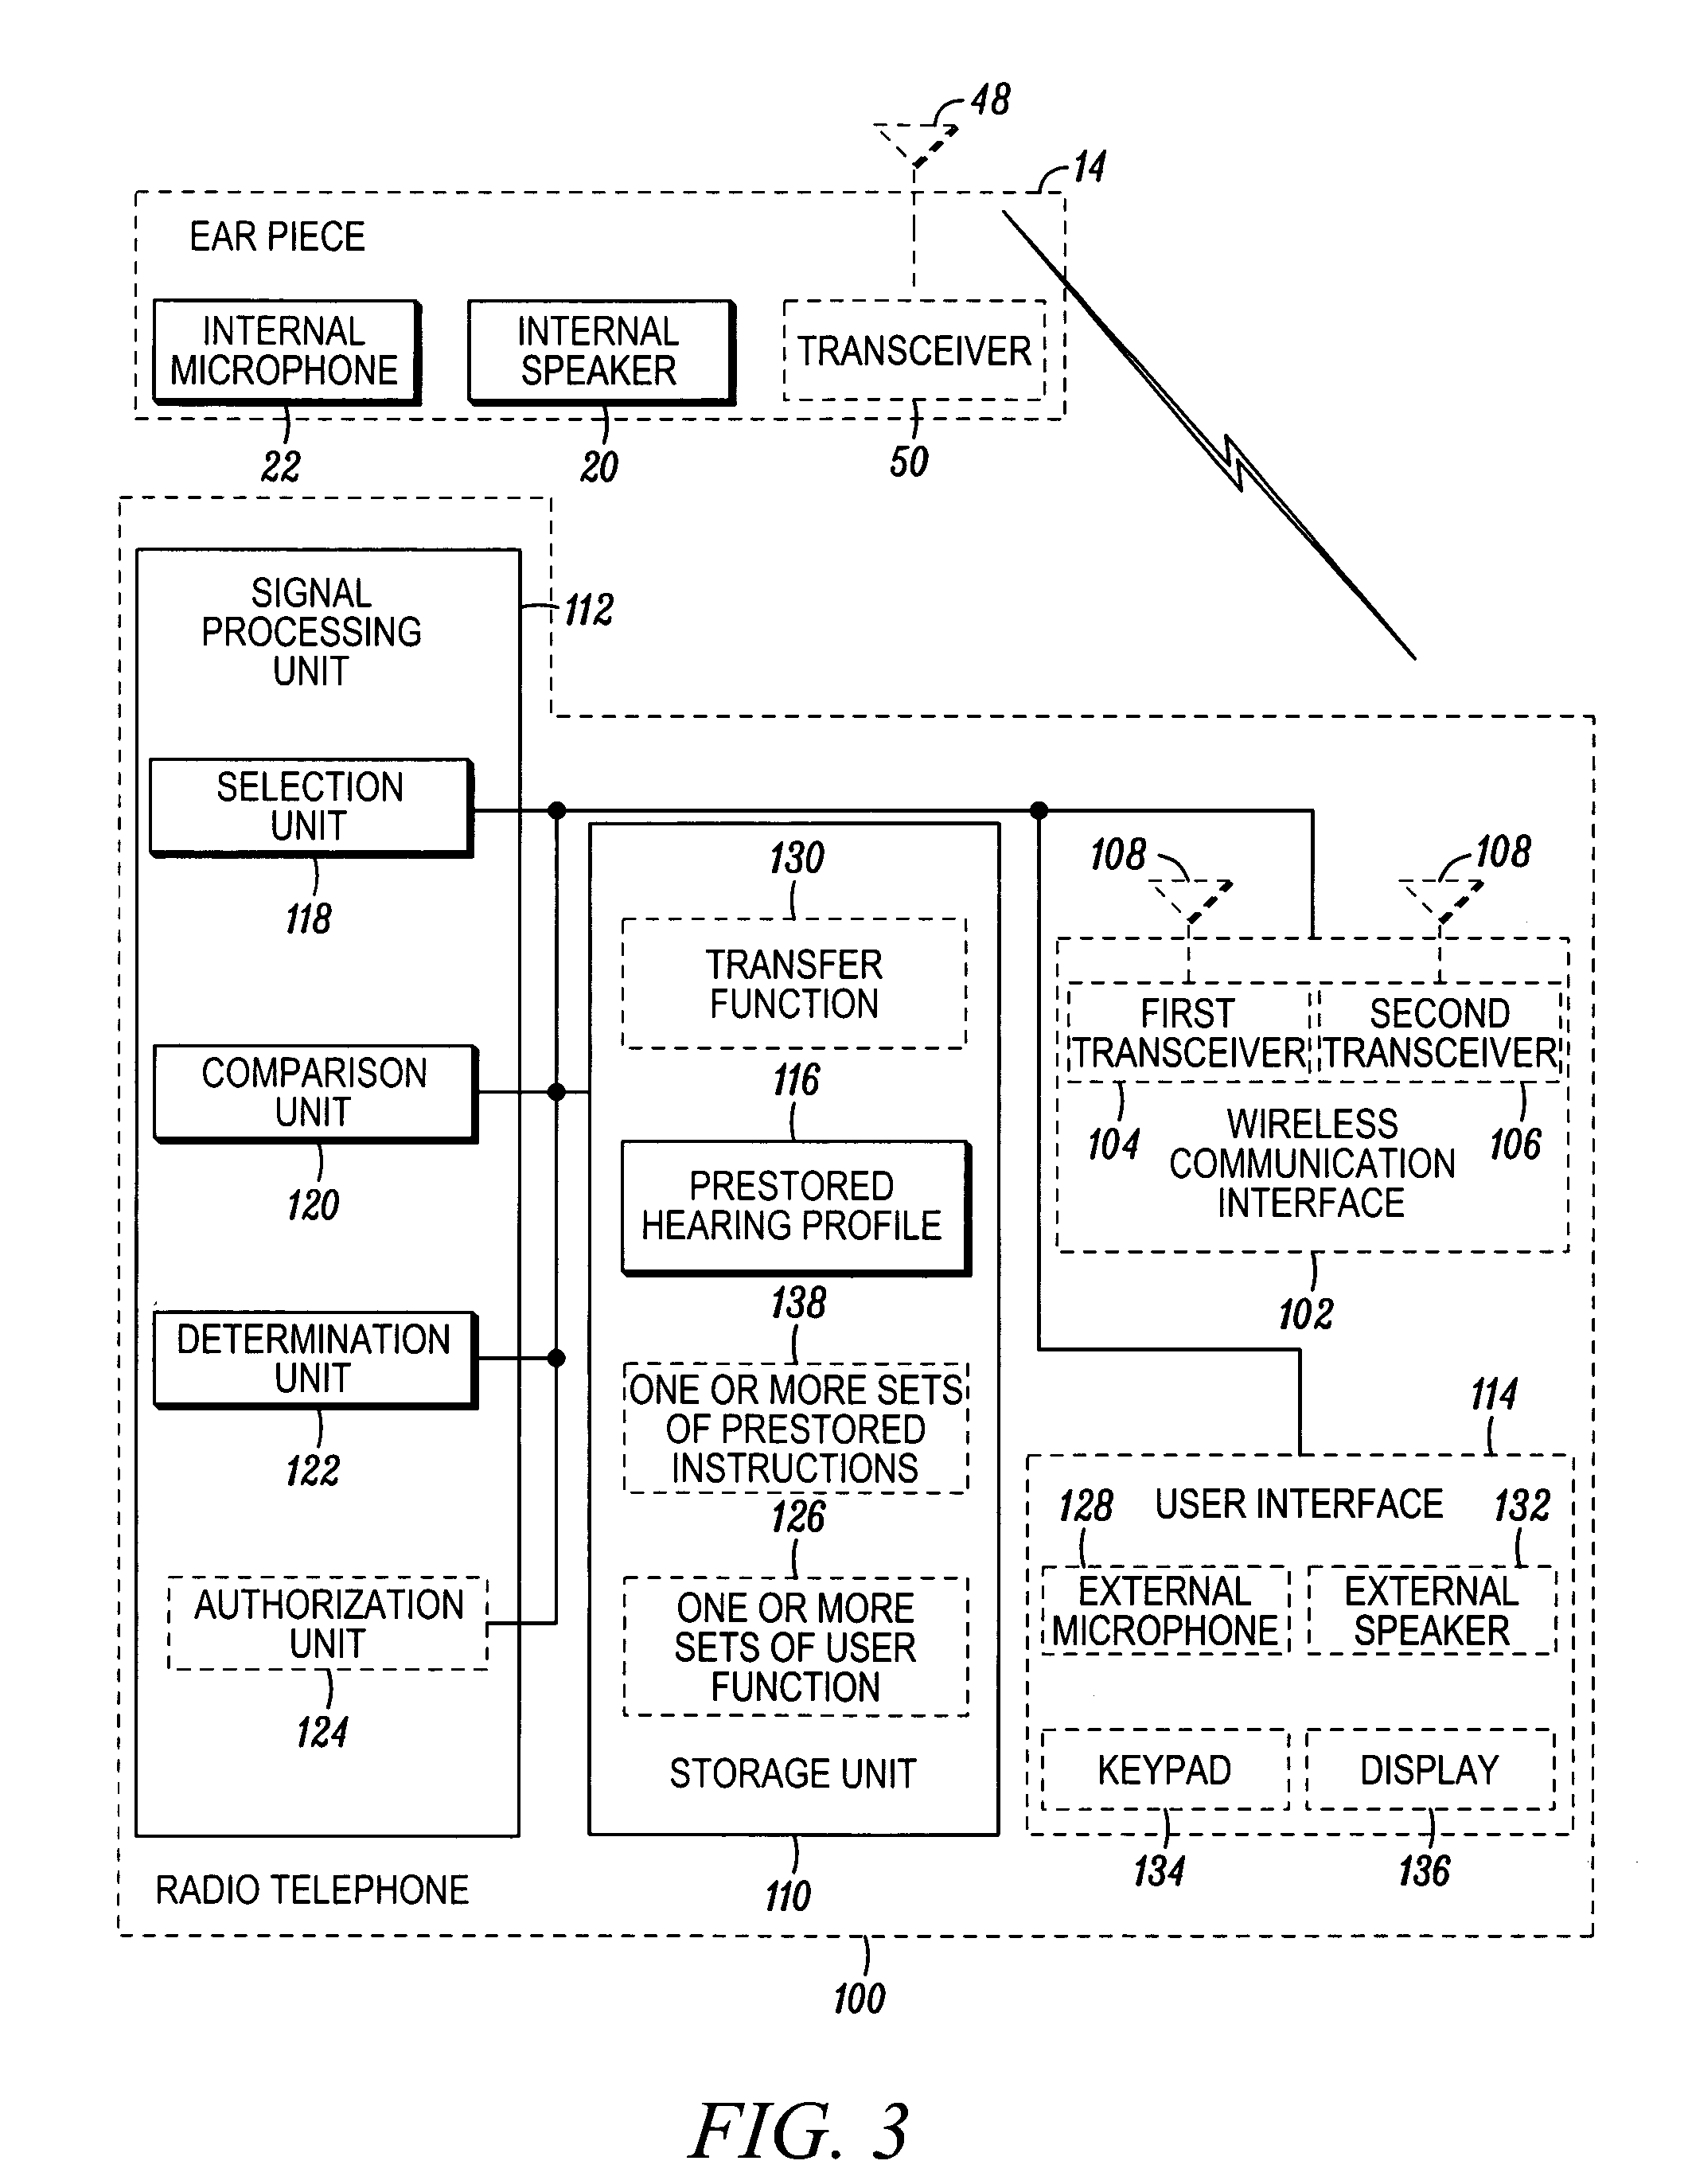 System and method for determining an in-ear acoustic response for confirming the identity of a user